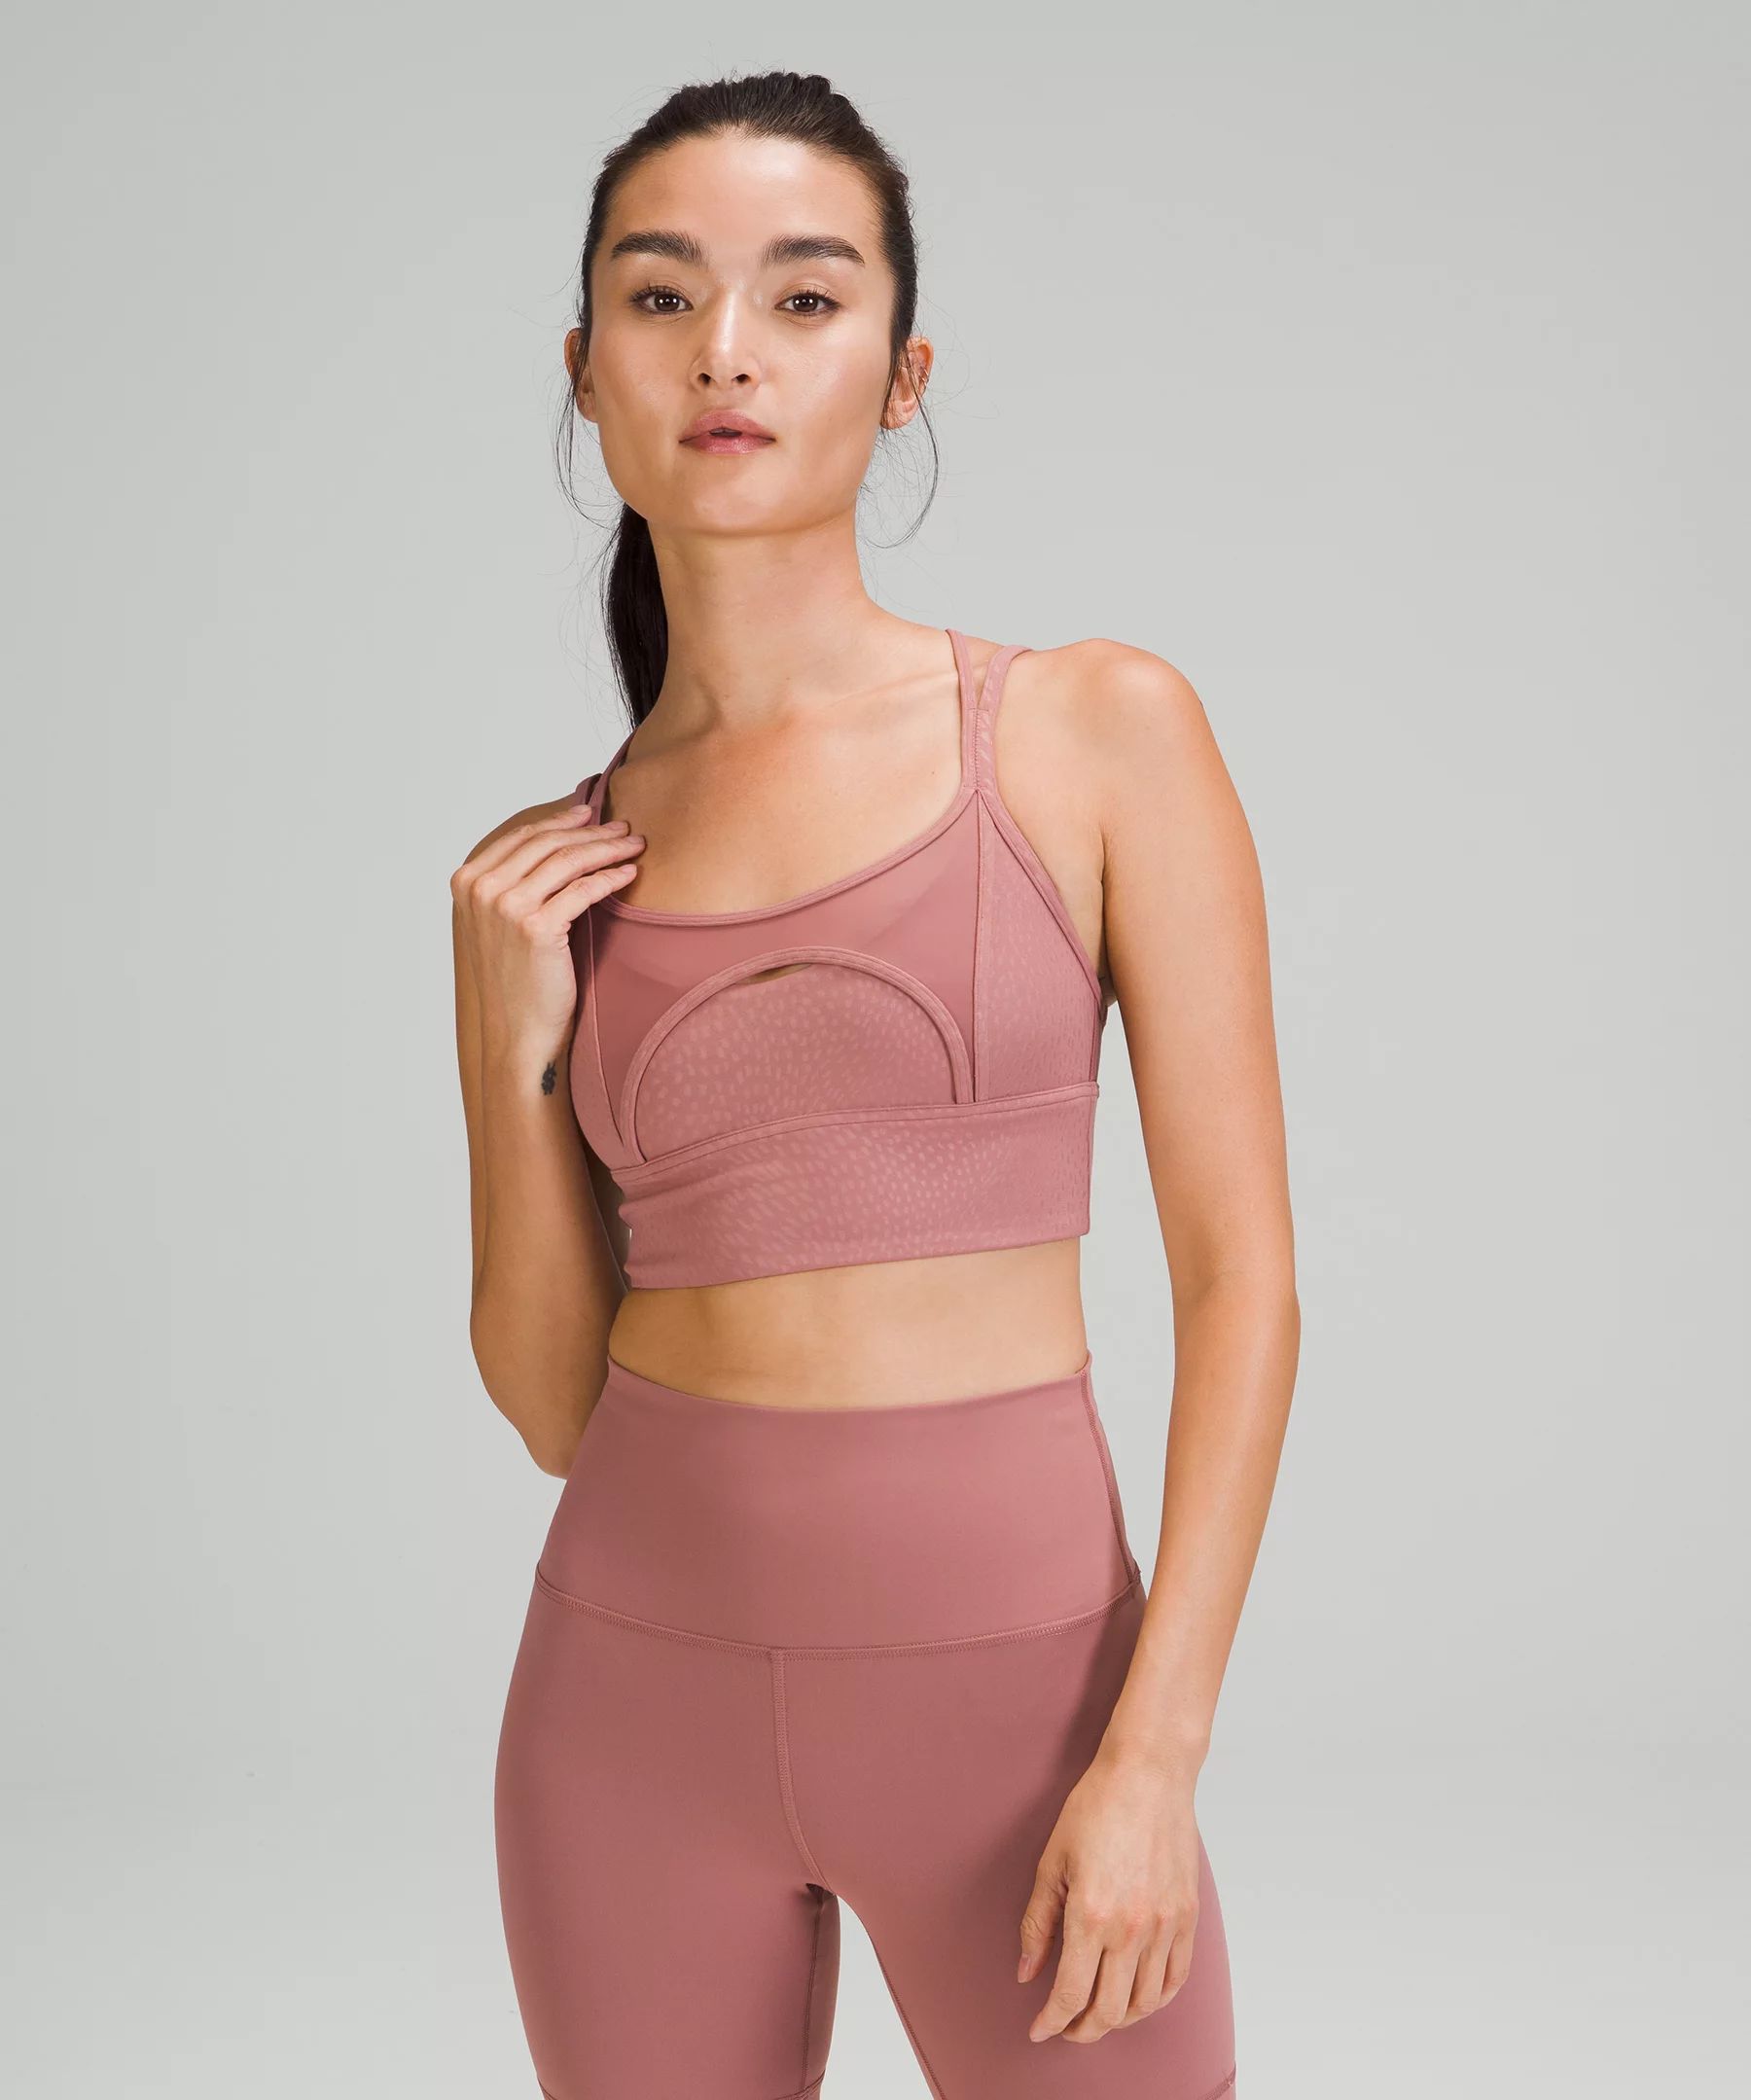 Nulu™ and Mesh Yoga BraLight Support, A/B Cups | Lululemon (US)